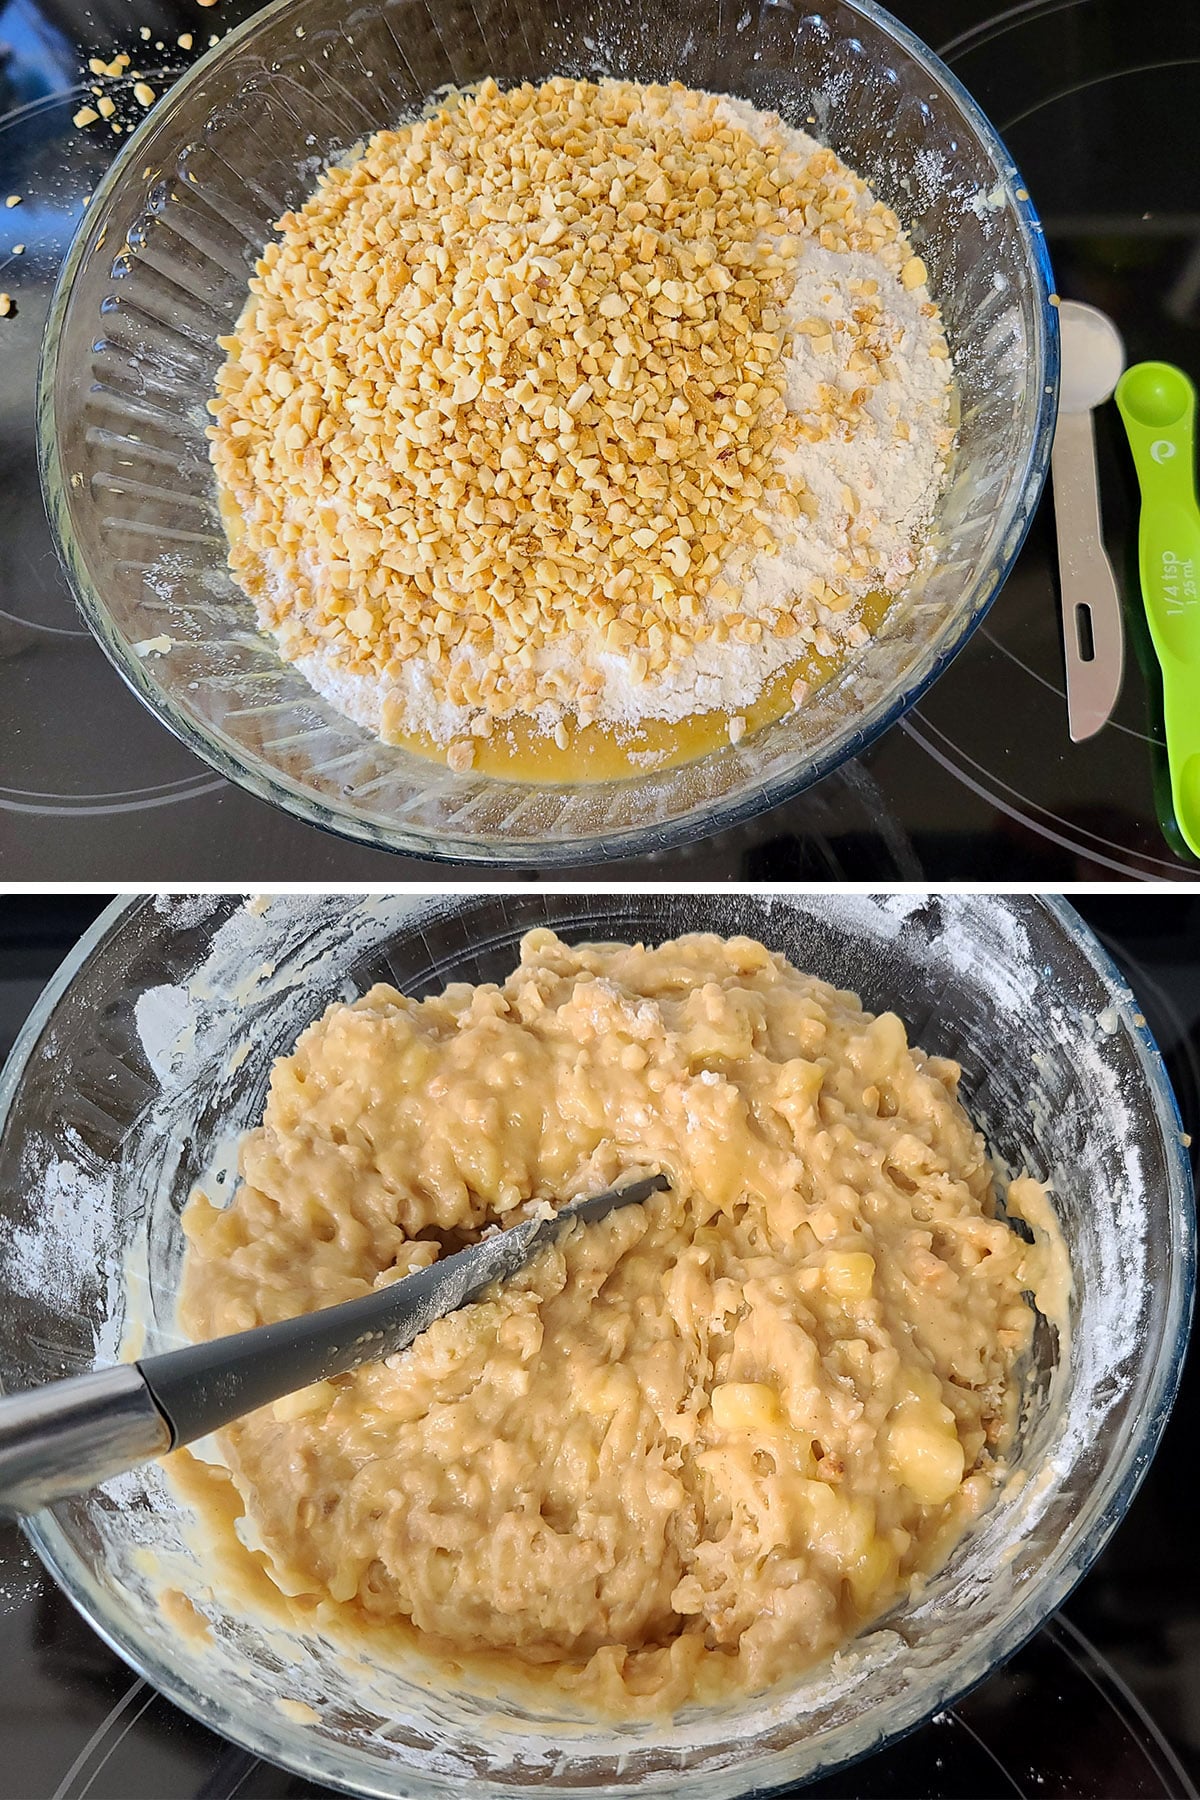 A 4 part image showing the dry ingredients being added to the wet ingredients and mixed together.